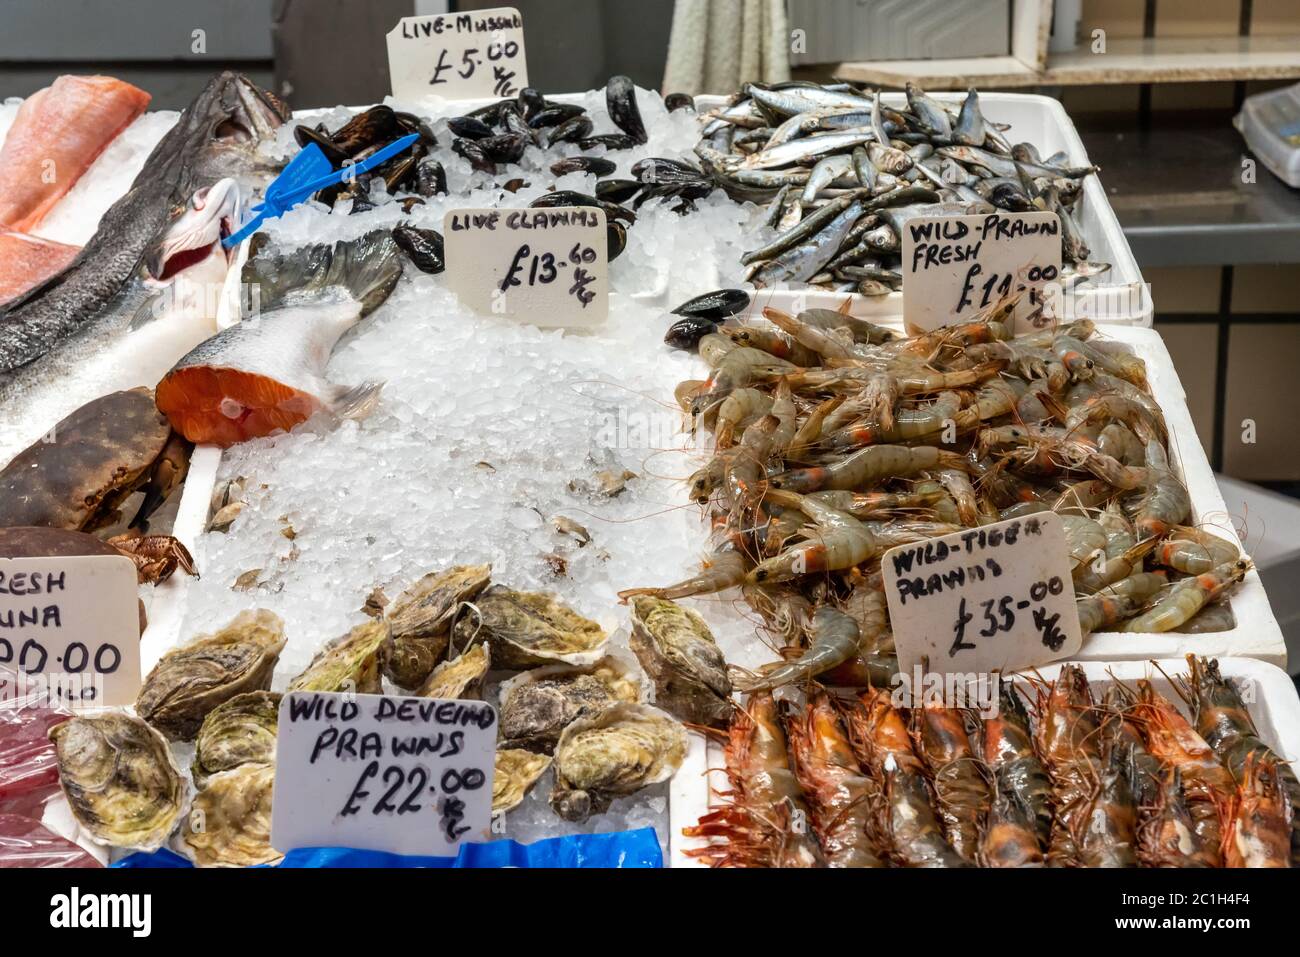 Clamms and crustaceans for sale at a market Stock Photo